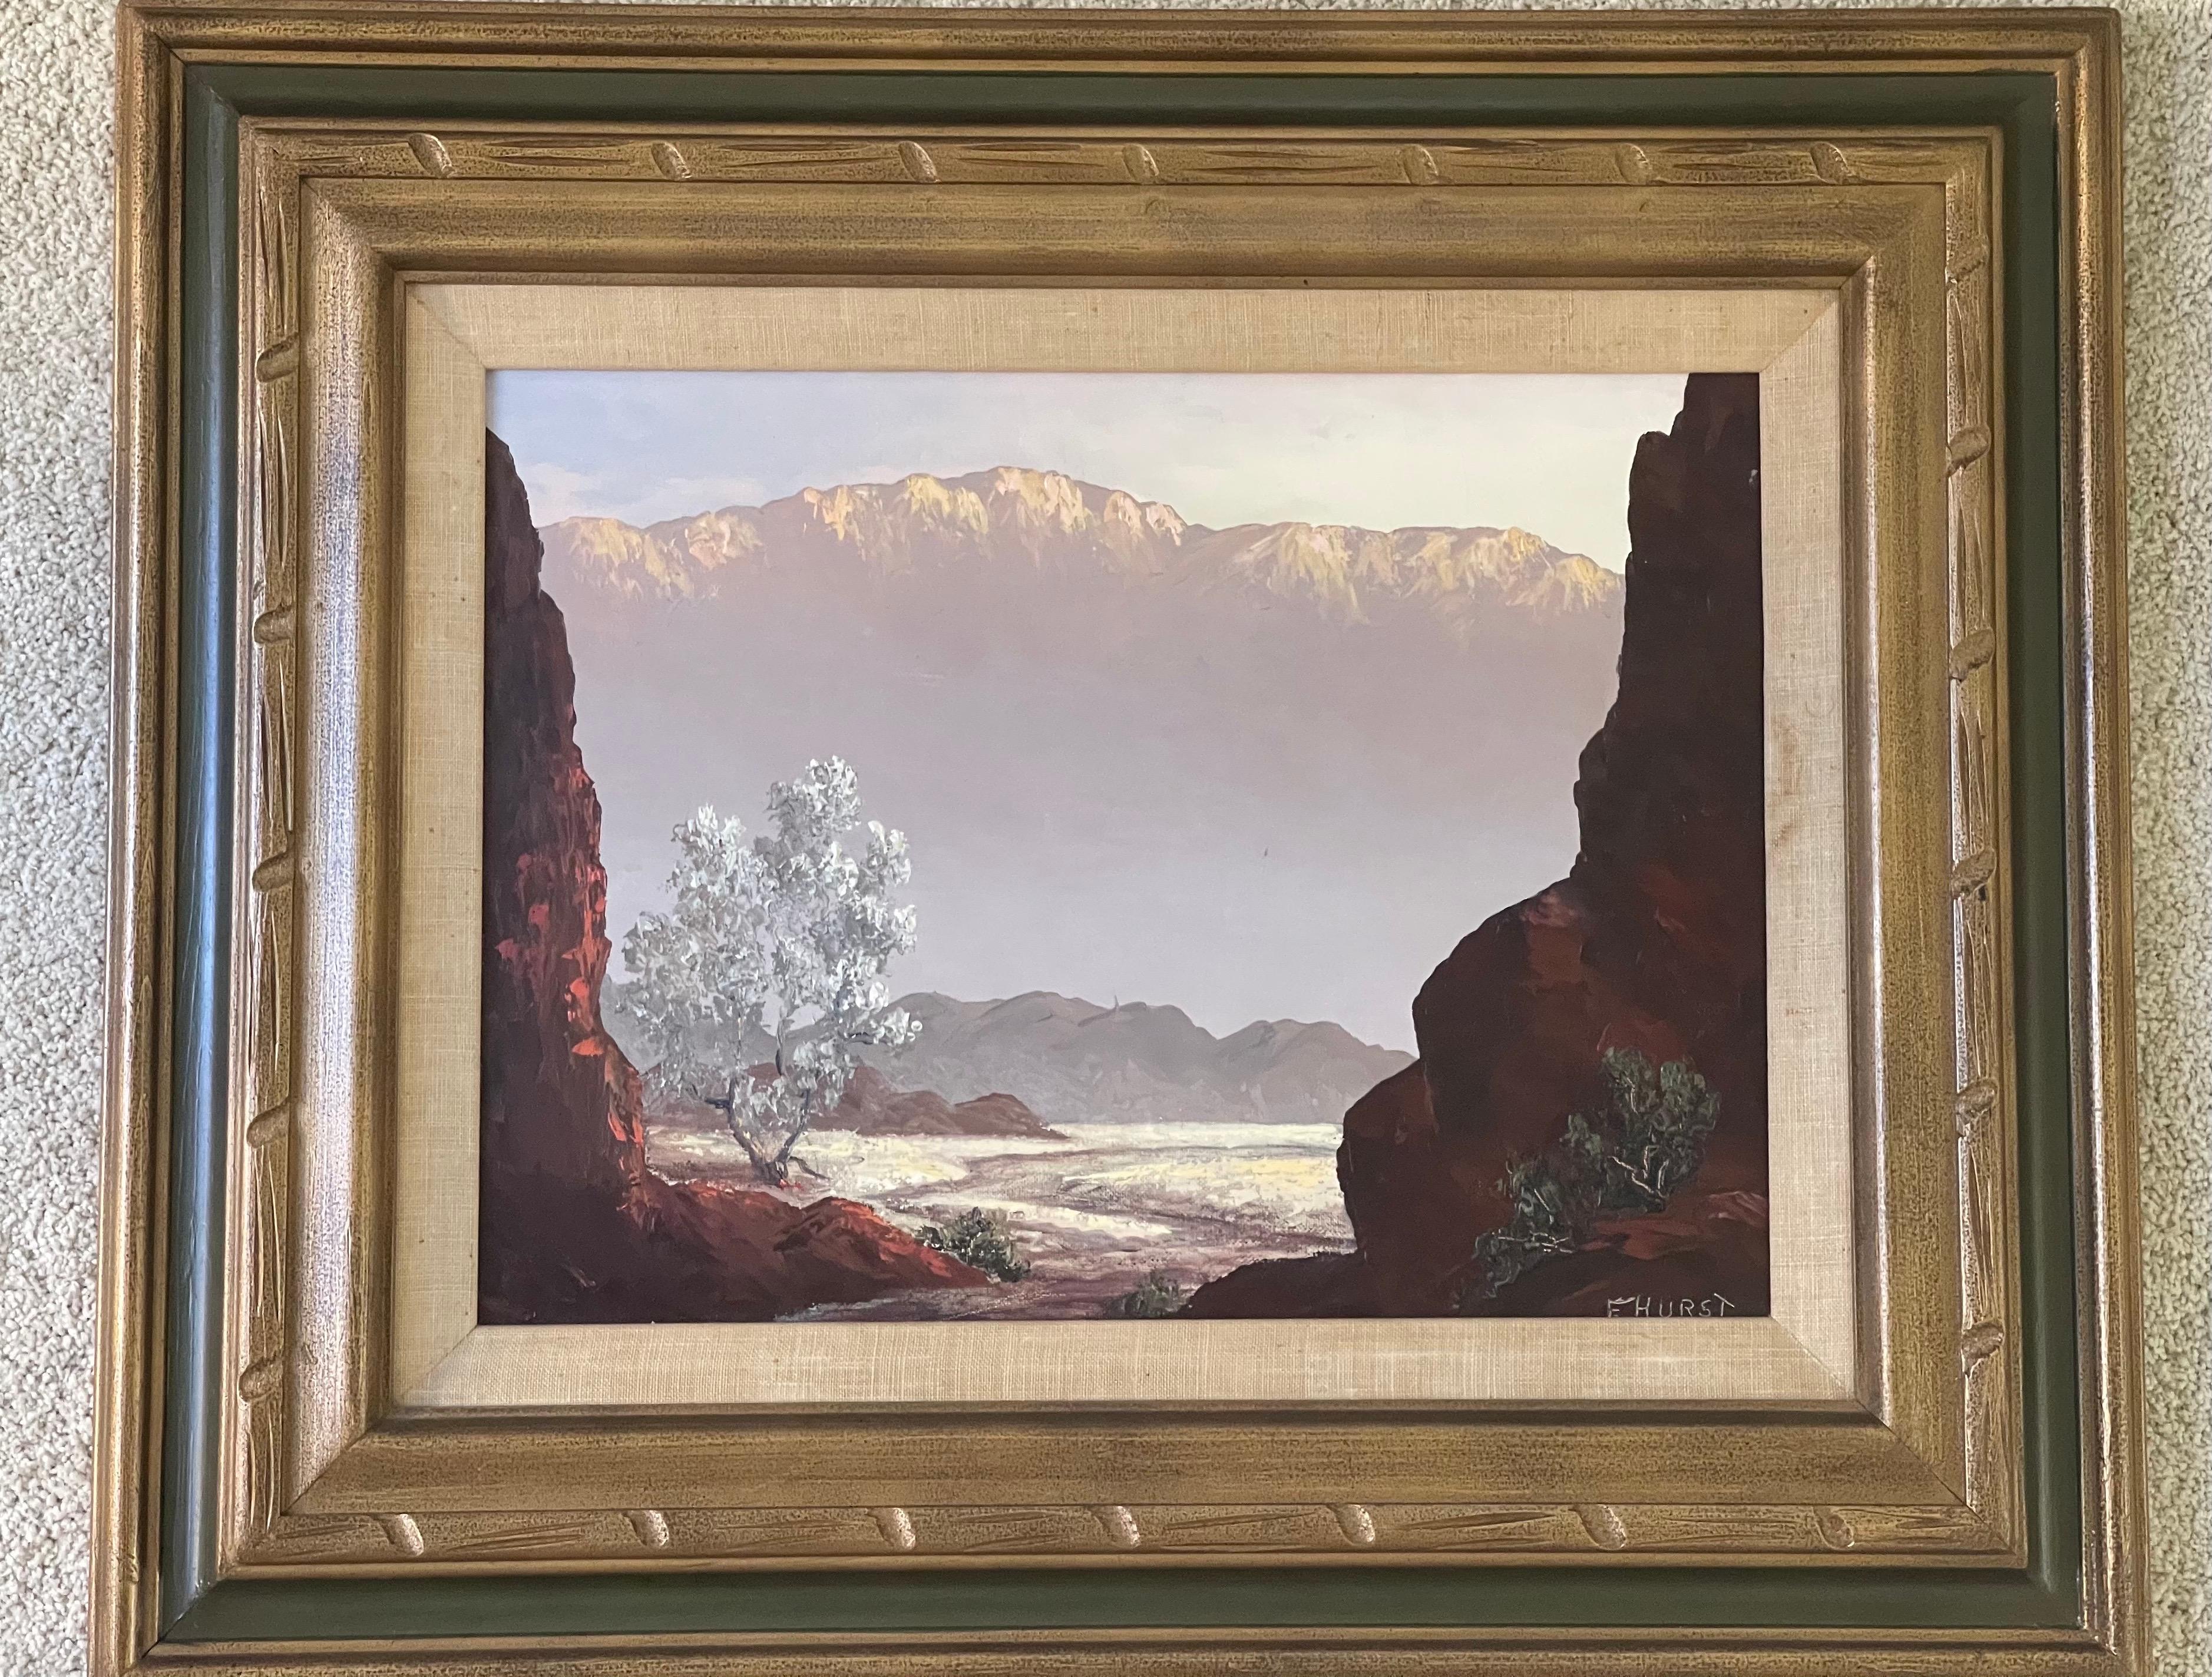 Absolutely stunning original oil on board landscape by listed artist Martha Eleanor Nicholson Hurst, circa 1950s. Hurst studied under Andrew Wyeth and Olaf Wieghorst and later, John Hilton. The painting depicts a view of snow covered mountains from